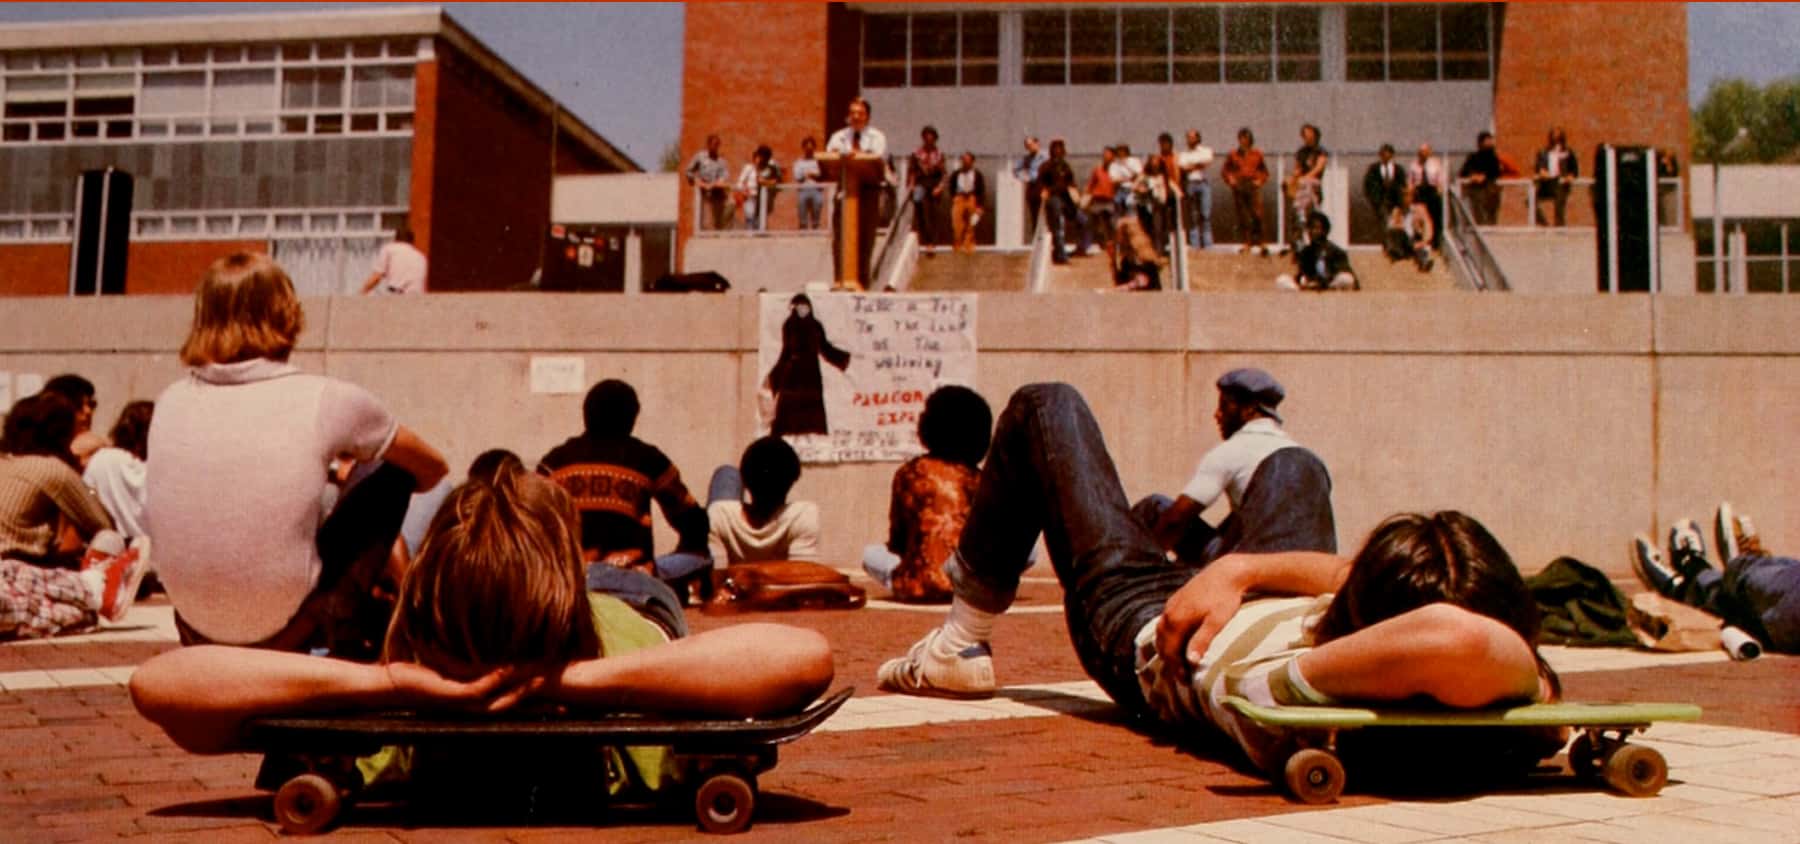 Students lie on skateboards in the brickyard while listening to a speaker